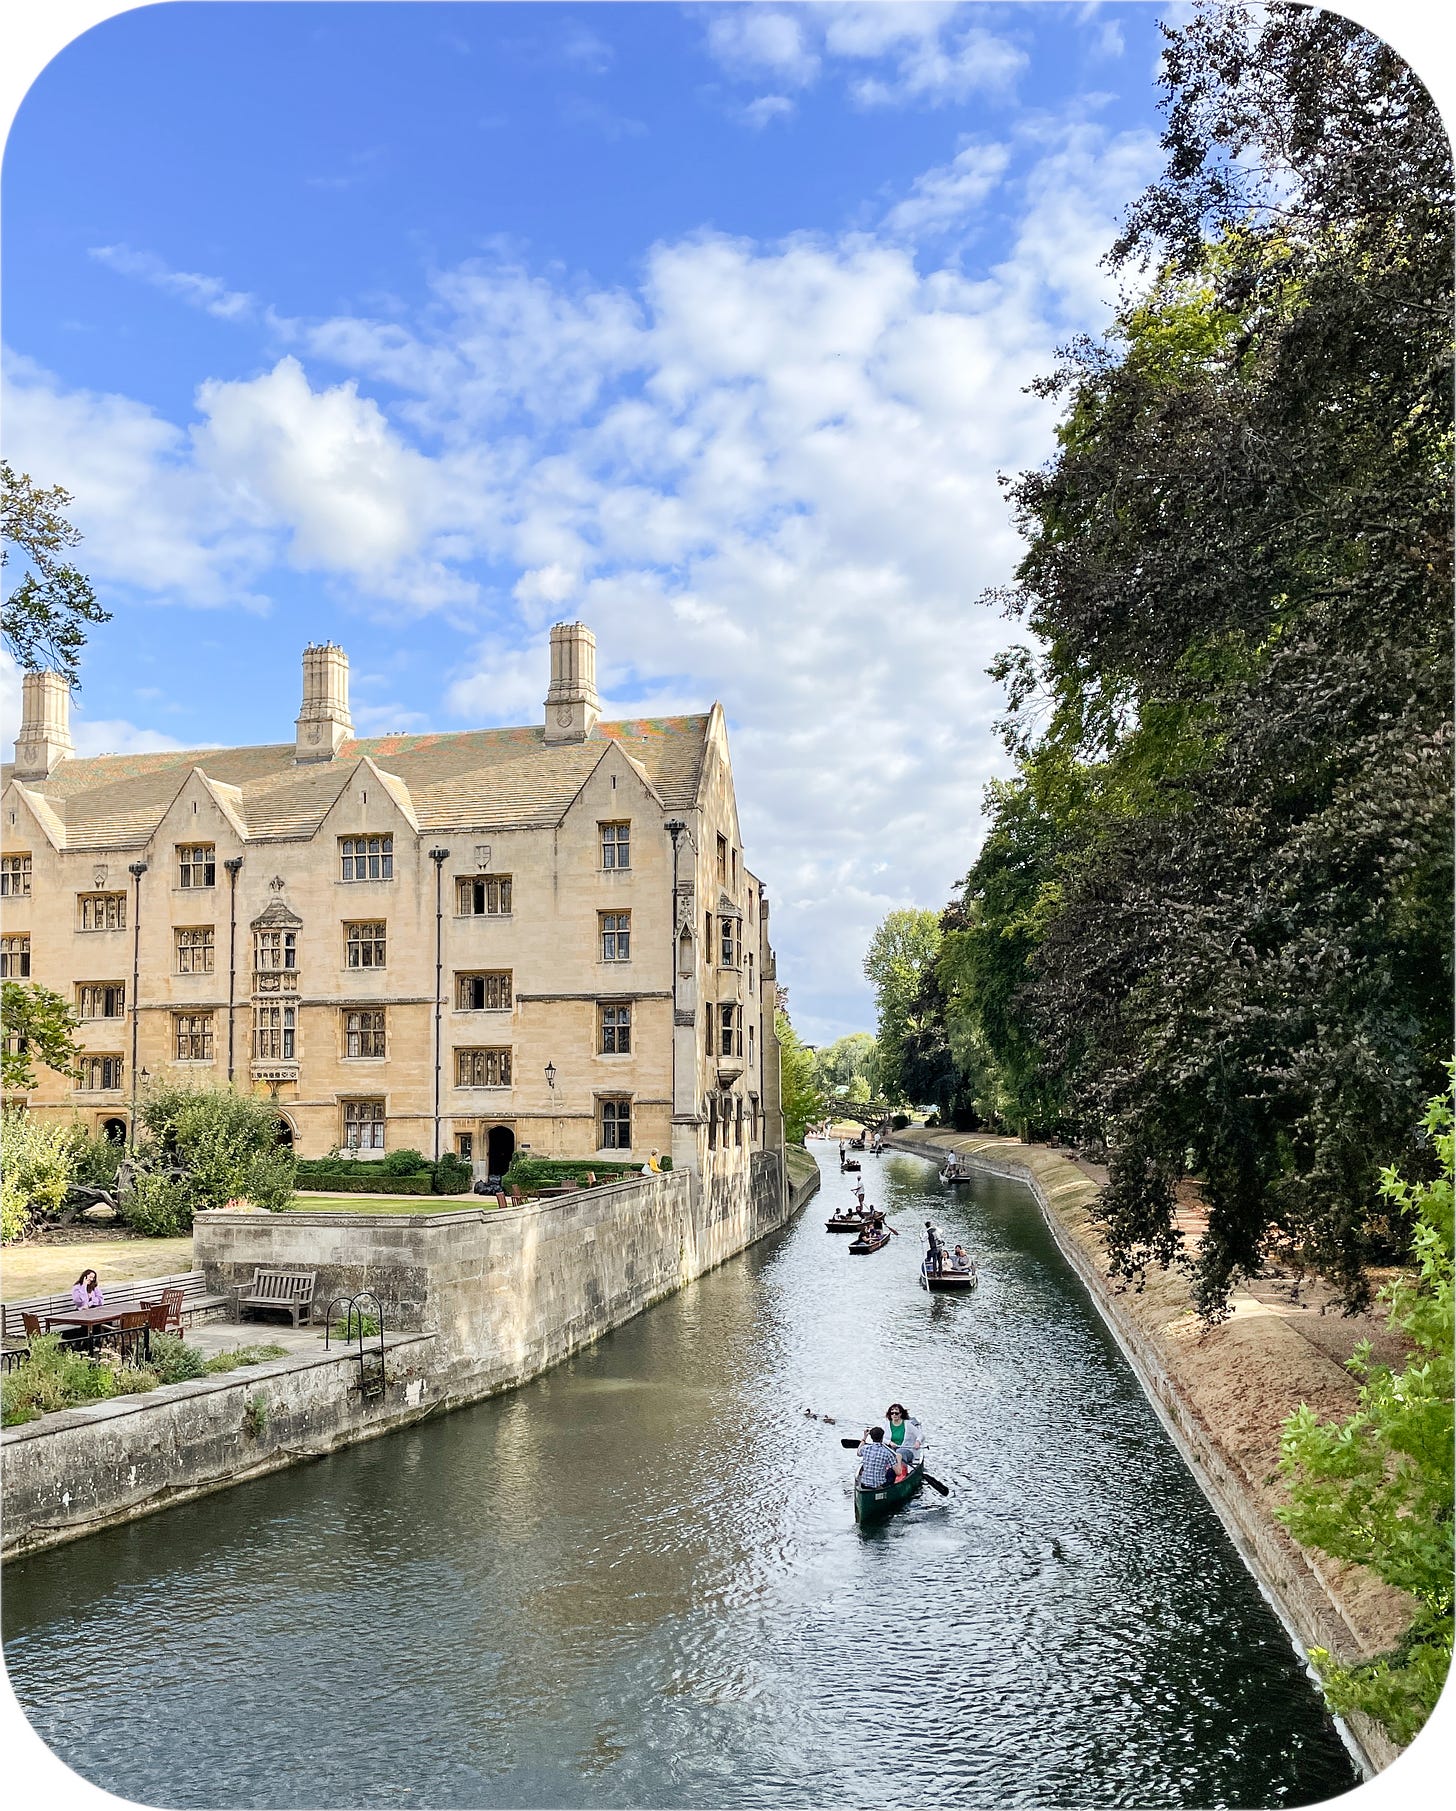 Punting on the Cam, Cambridge, England